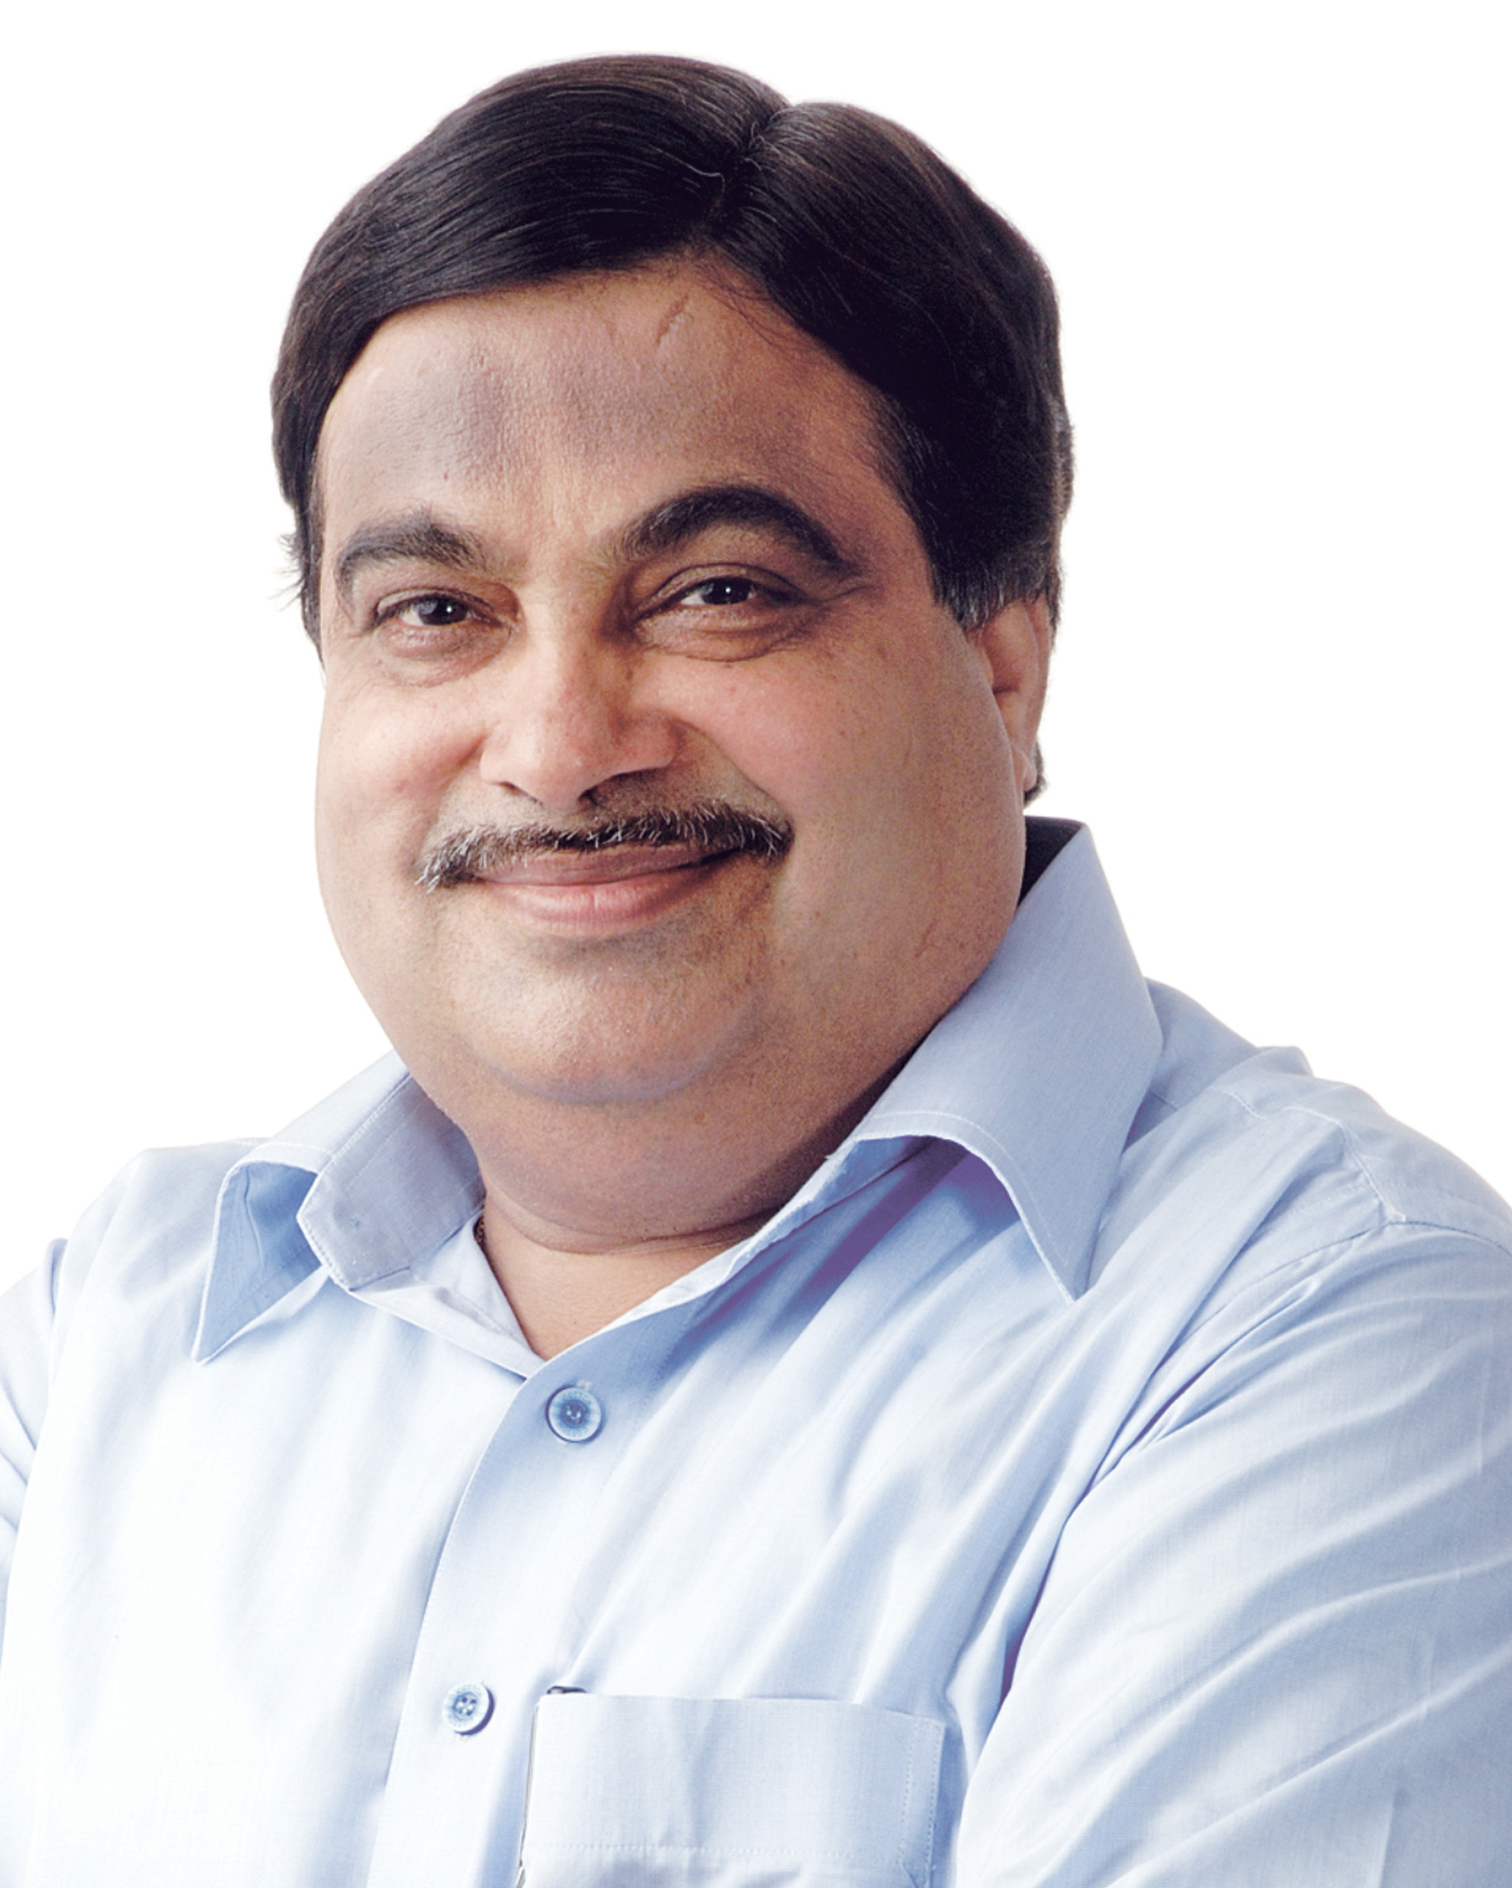 Union minister Nitin Gadkari announced 13 new railway bridges to be built in Pune district